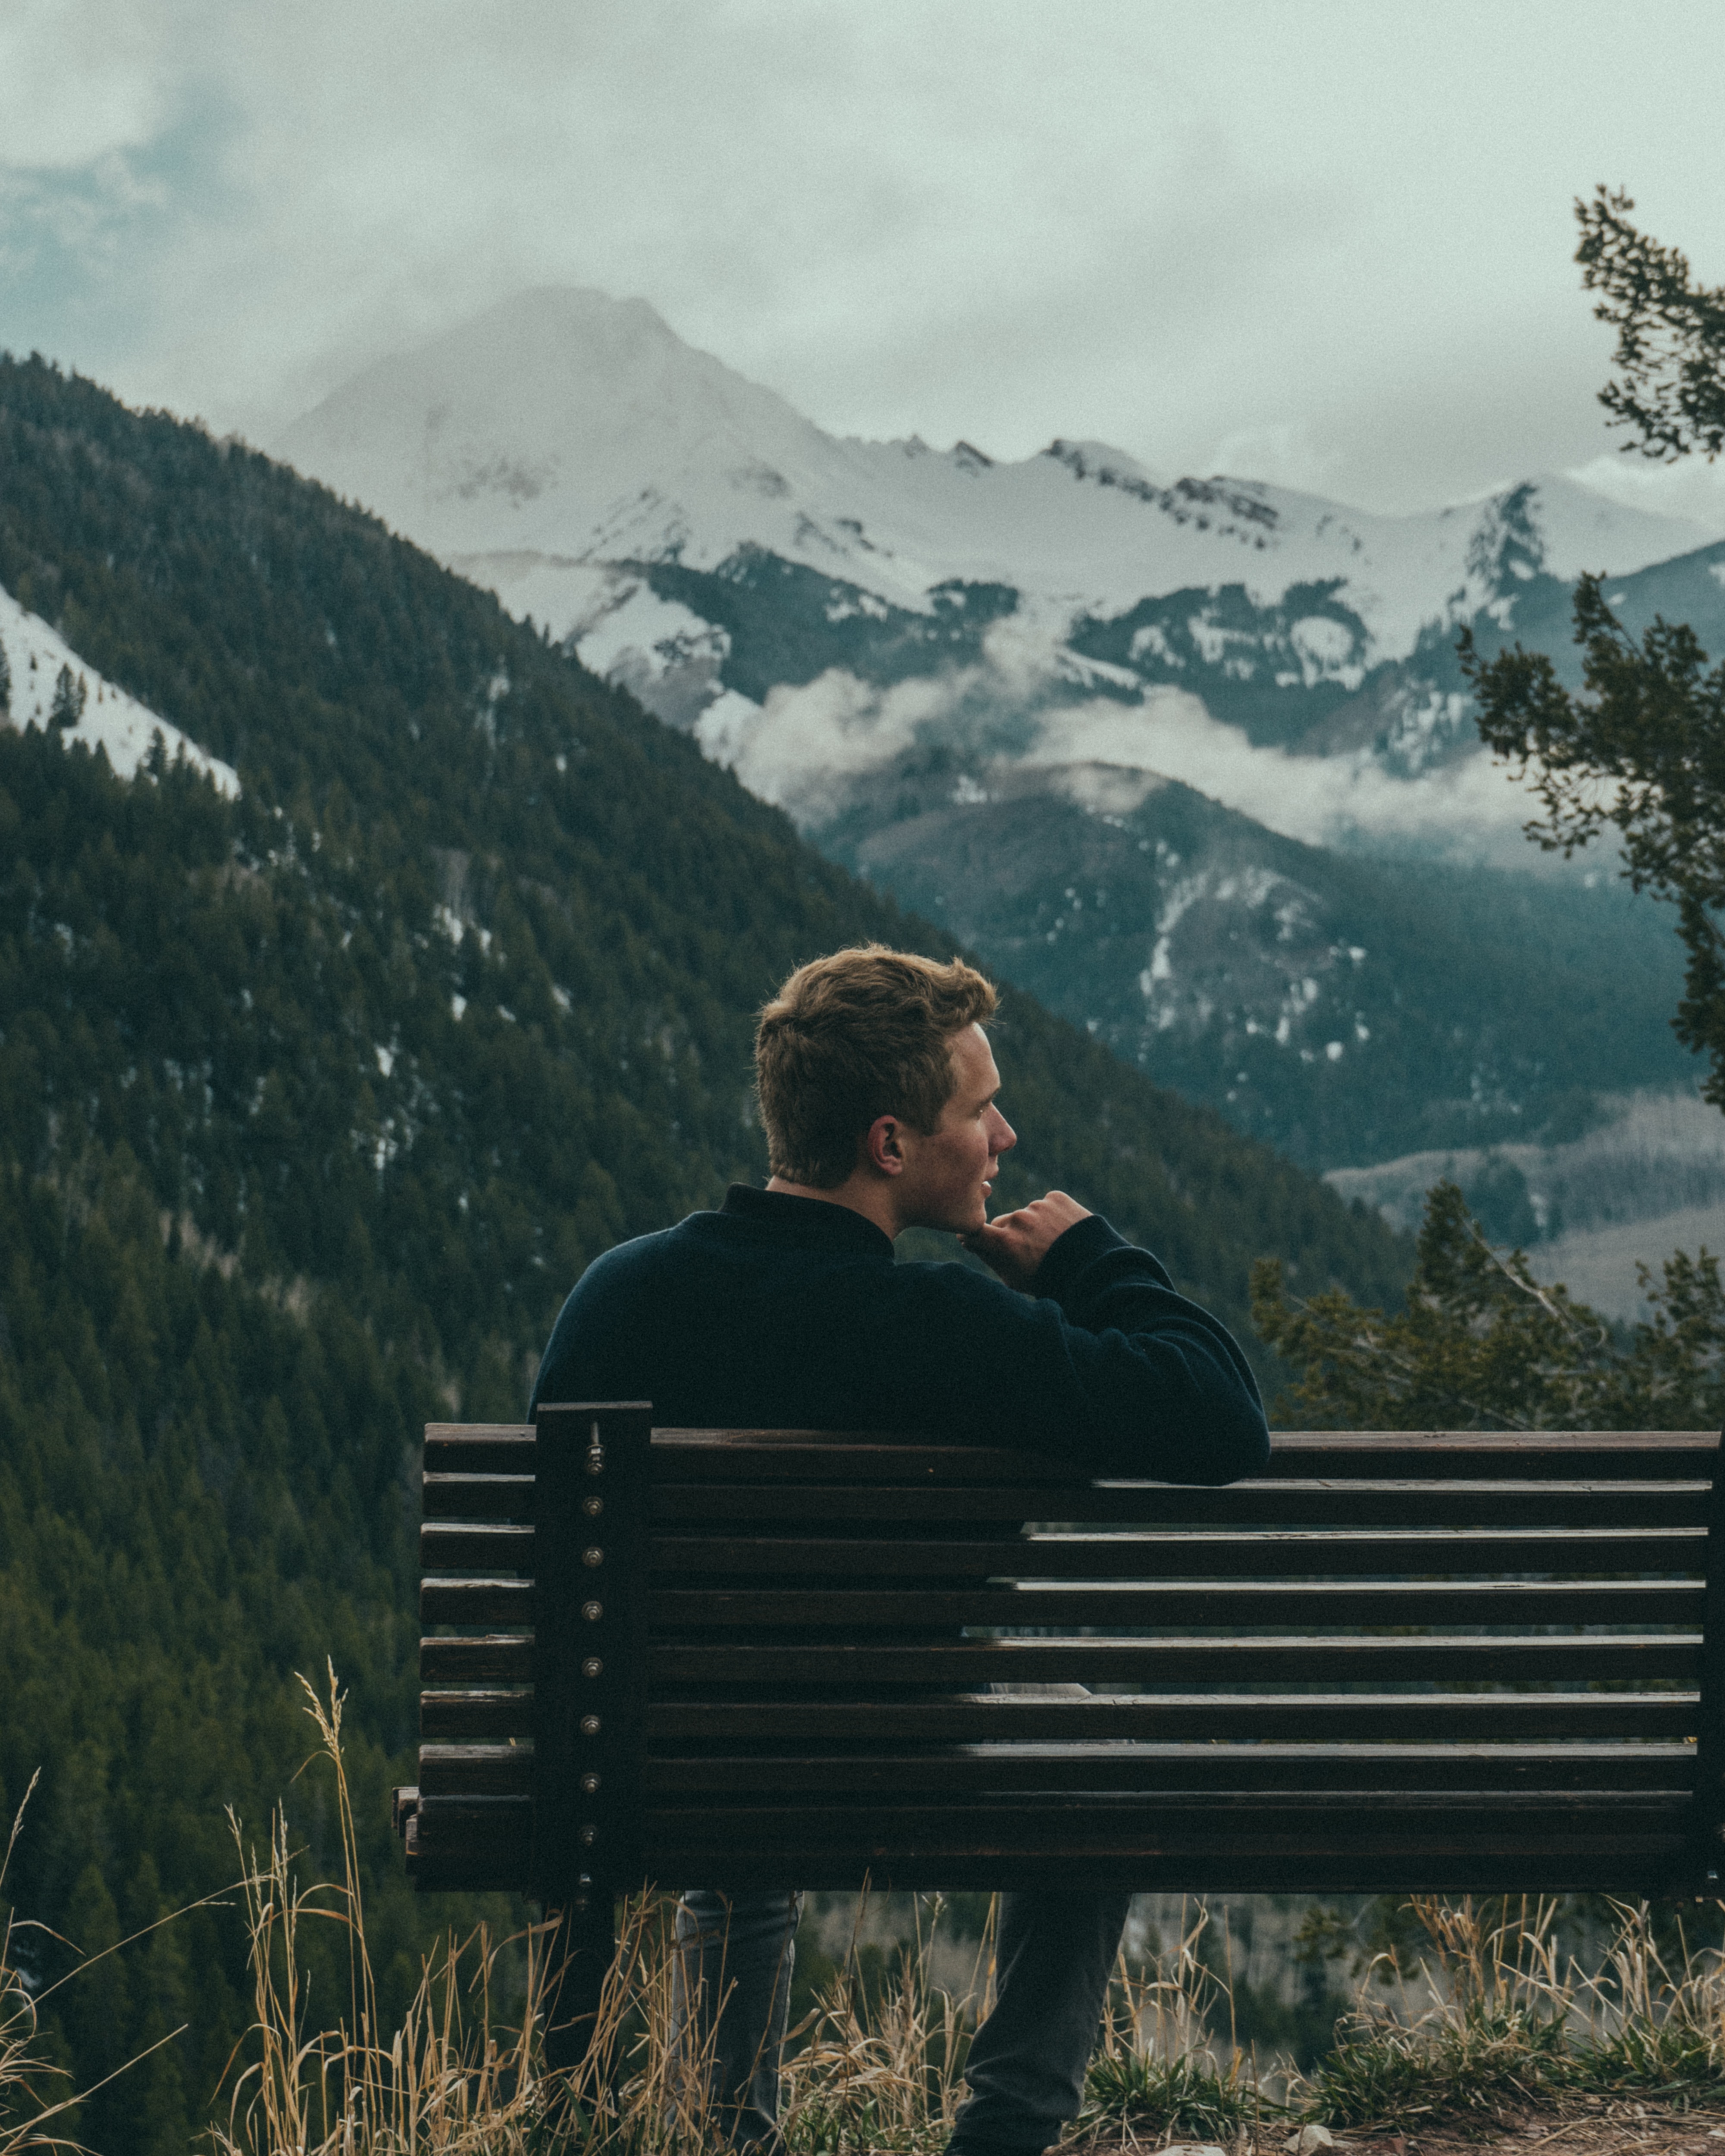 man sitting on bench over looking mountain